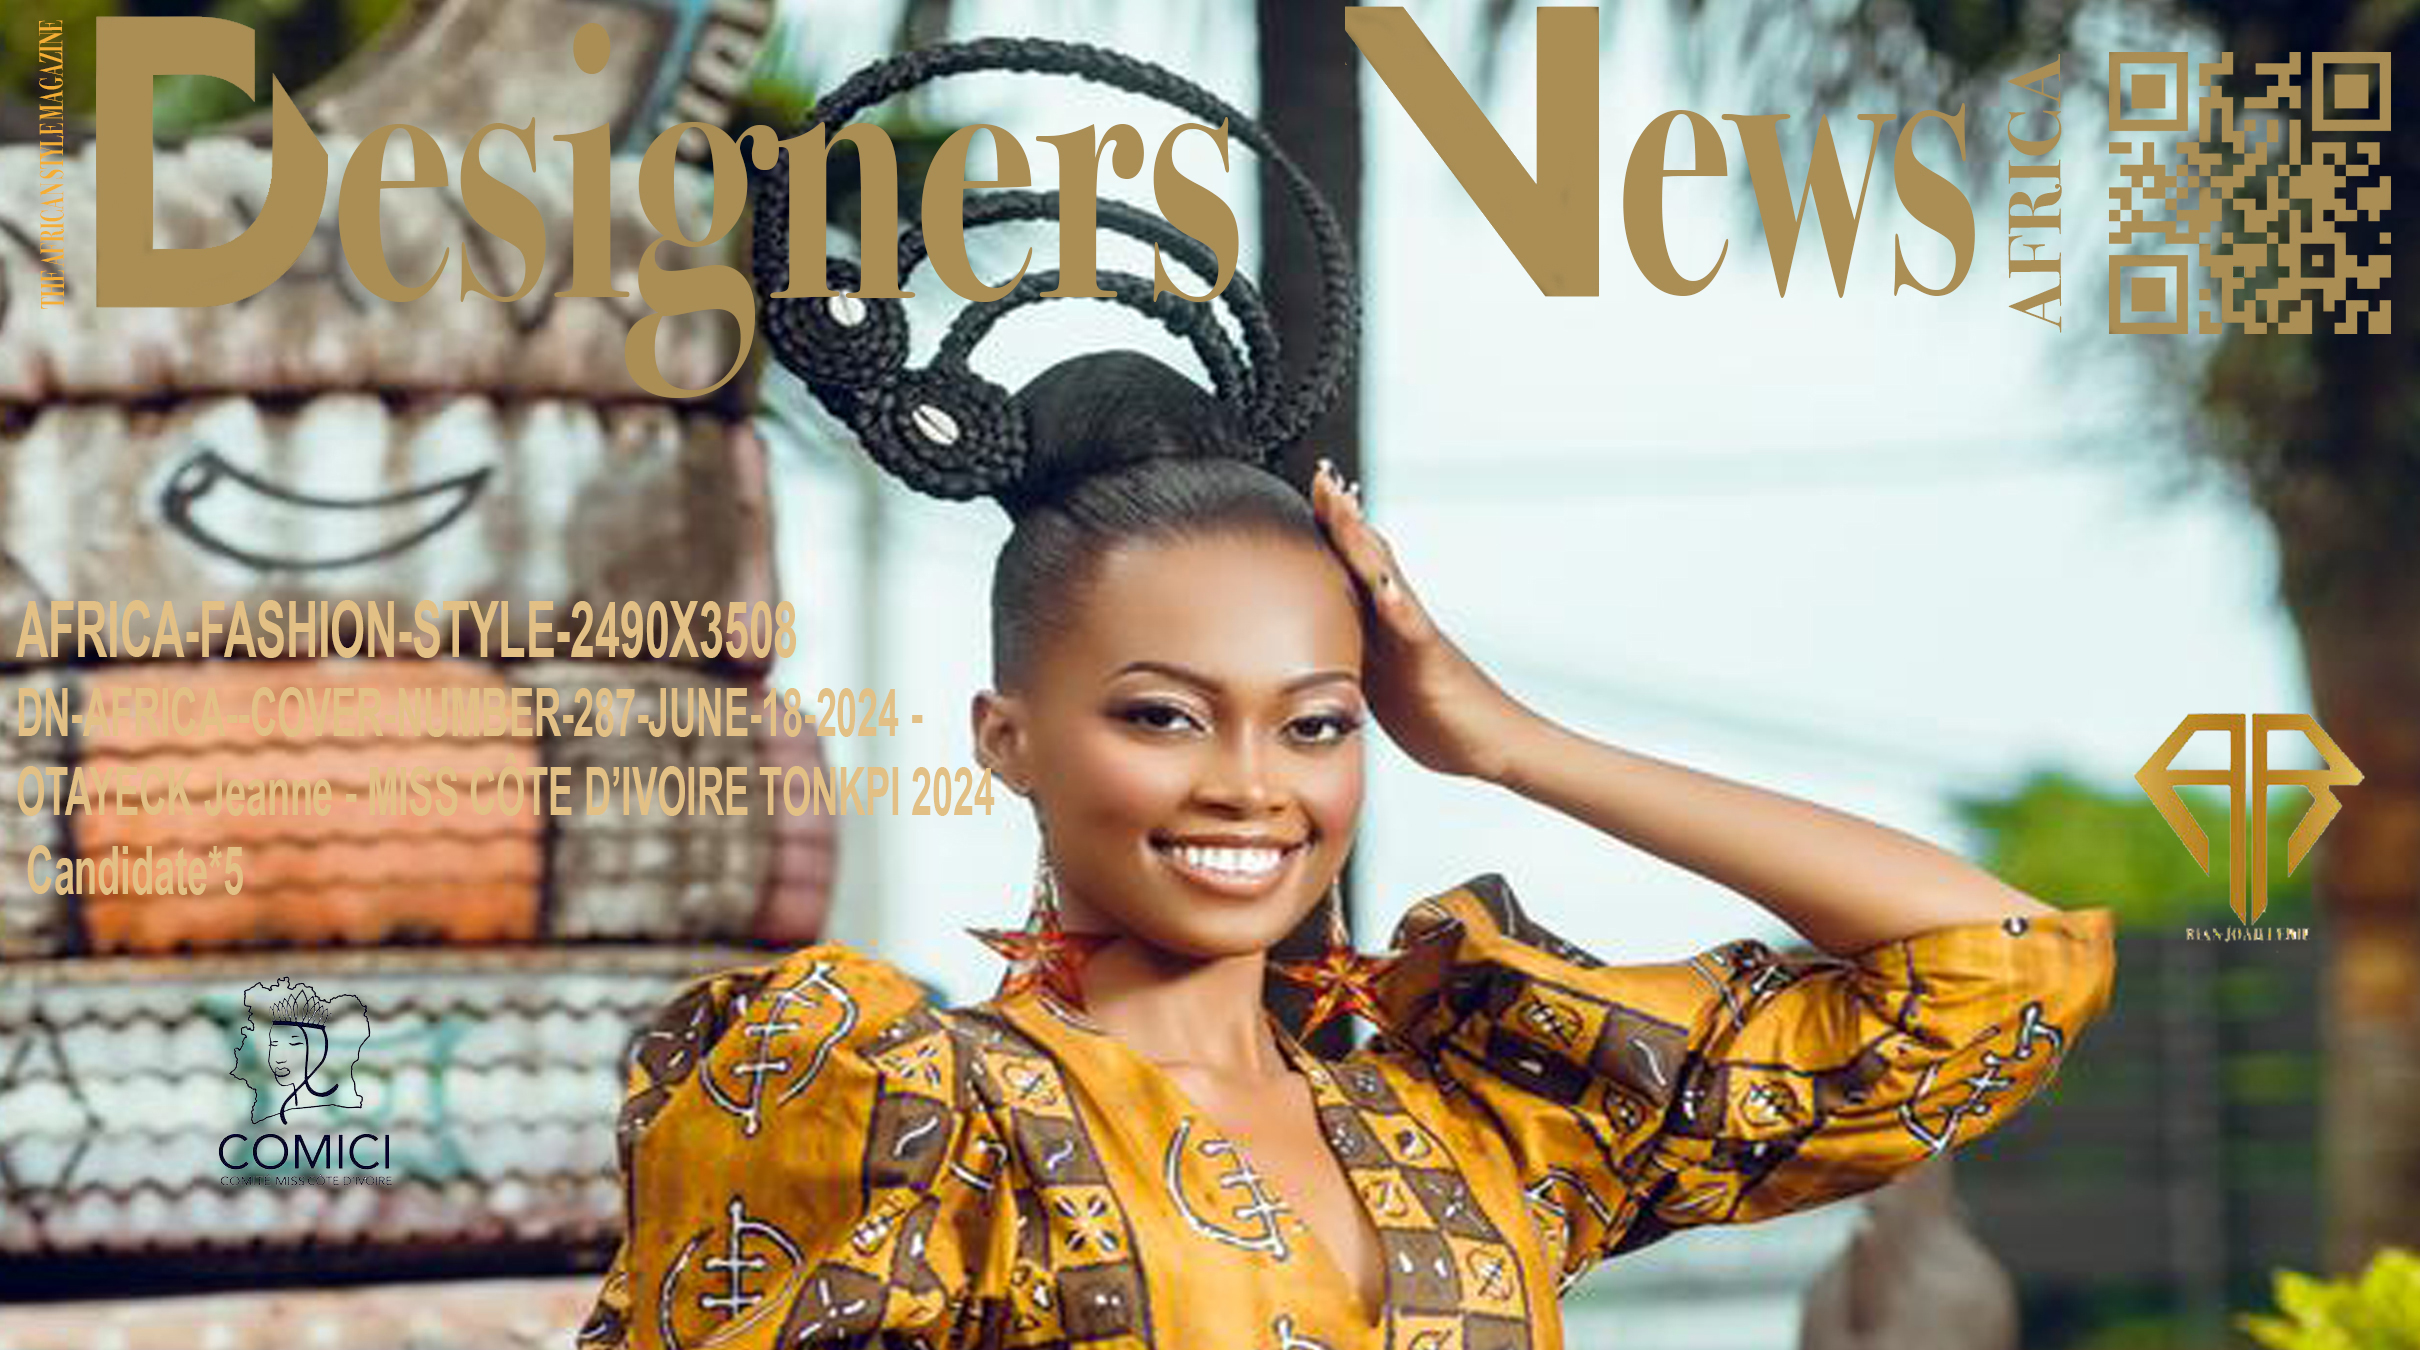 AFRICA-FASHION-STYLE-2490X3508-DN-AFRICA-COVER-NUMBER-287-JUNE-18-2024 – OTAYECK Jeanne – MISS CÔTE D’IVOIRE TONKPI 2024 – Candidate*5 Date: June 18 2024 Location:  Tonkpi, Côte d’Ivoire